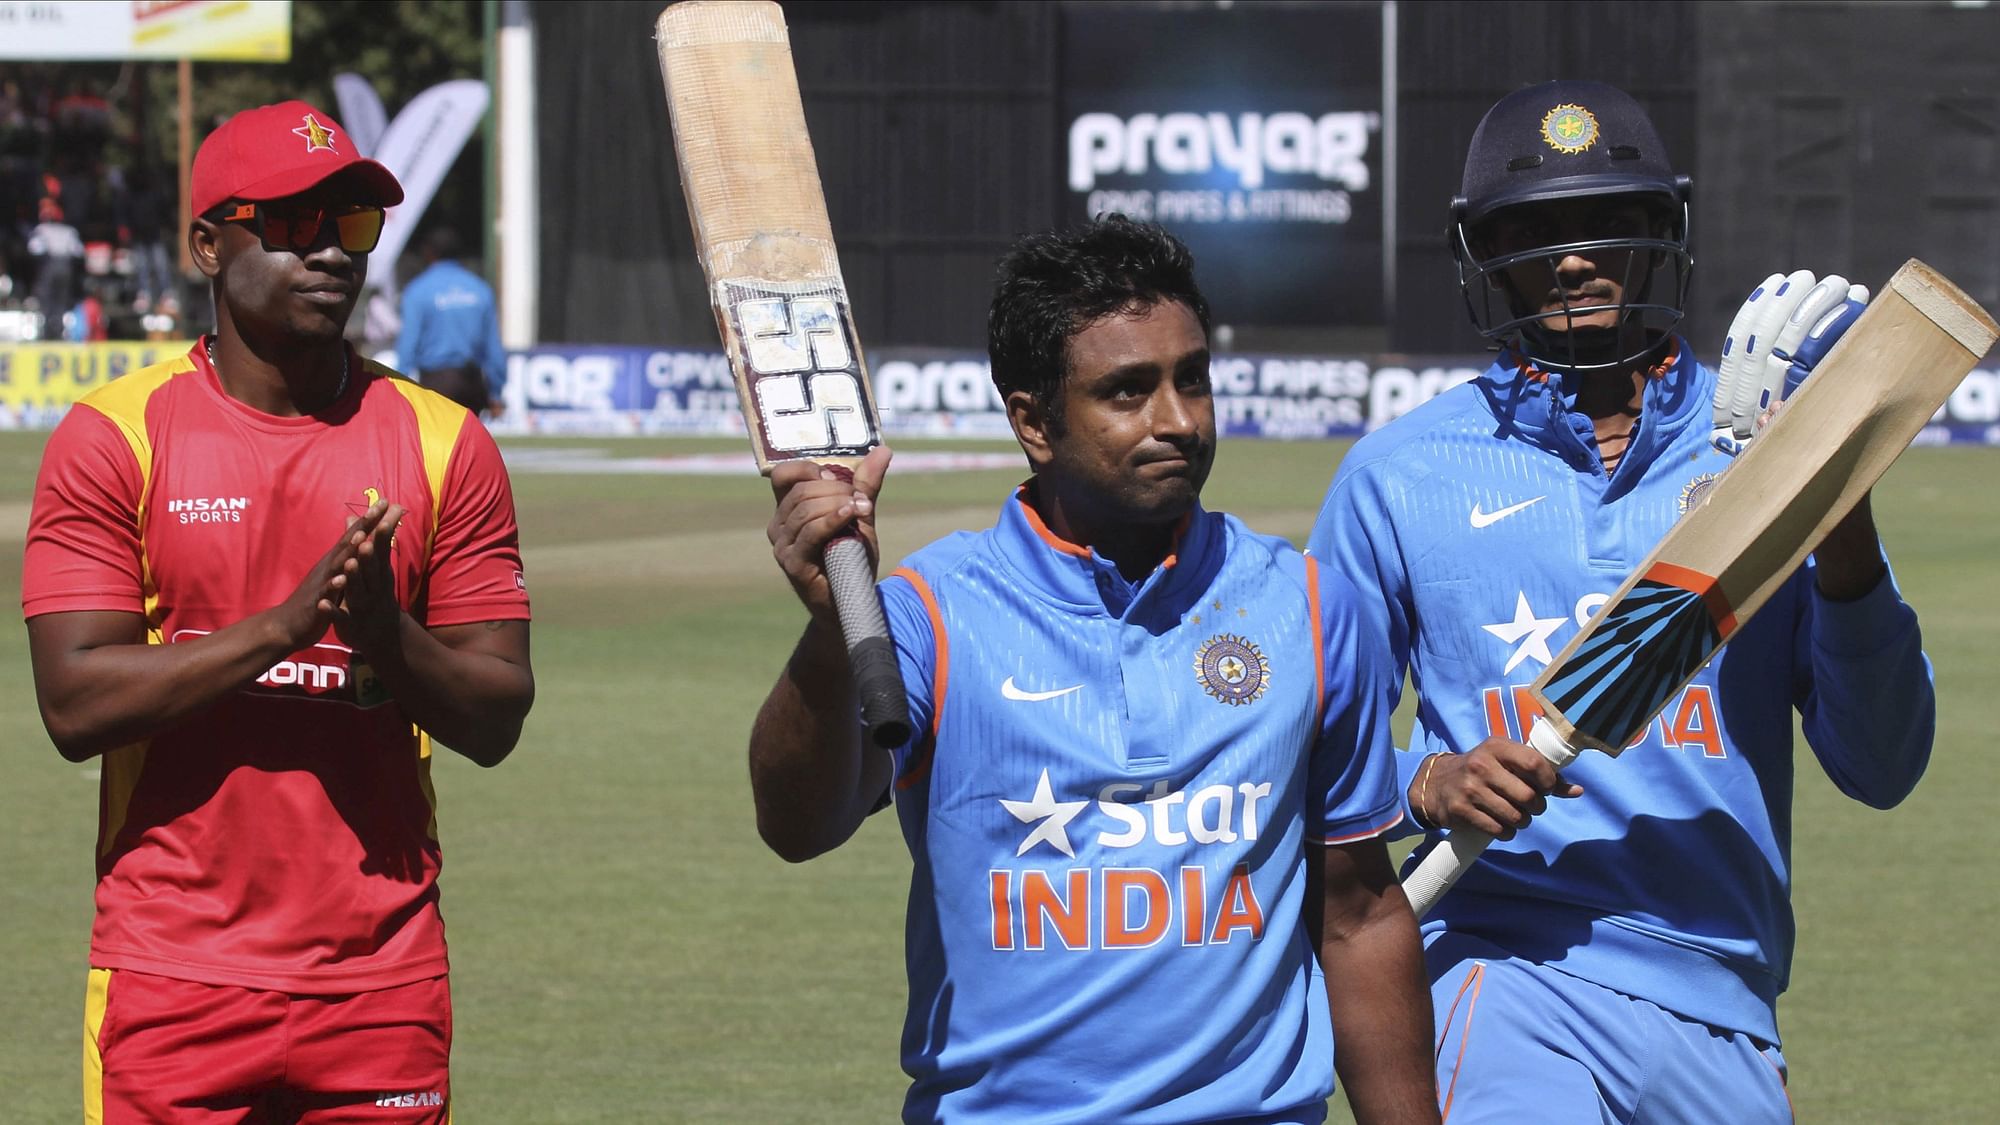 Ambati Rayudu acknowledges the crowd as he walks off the field after scoring a century  against Zimbabwe.